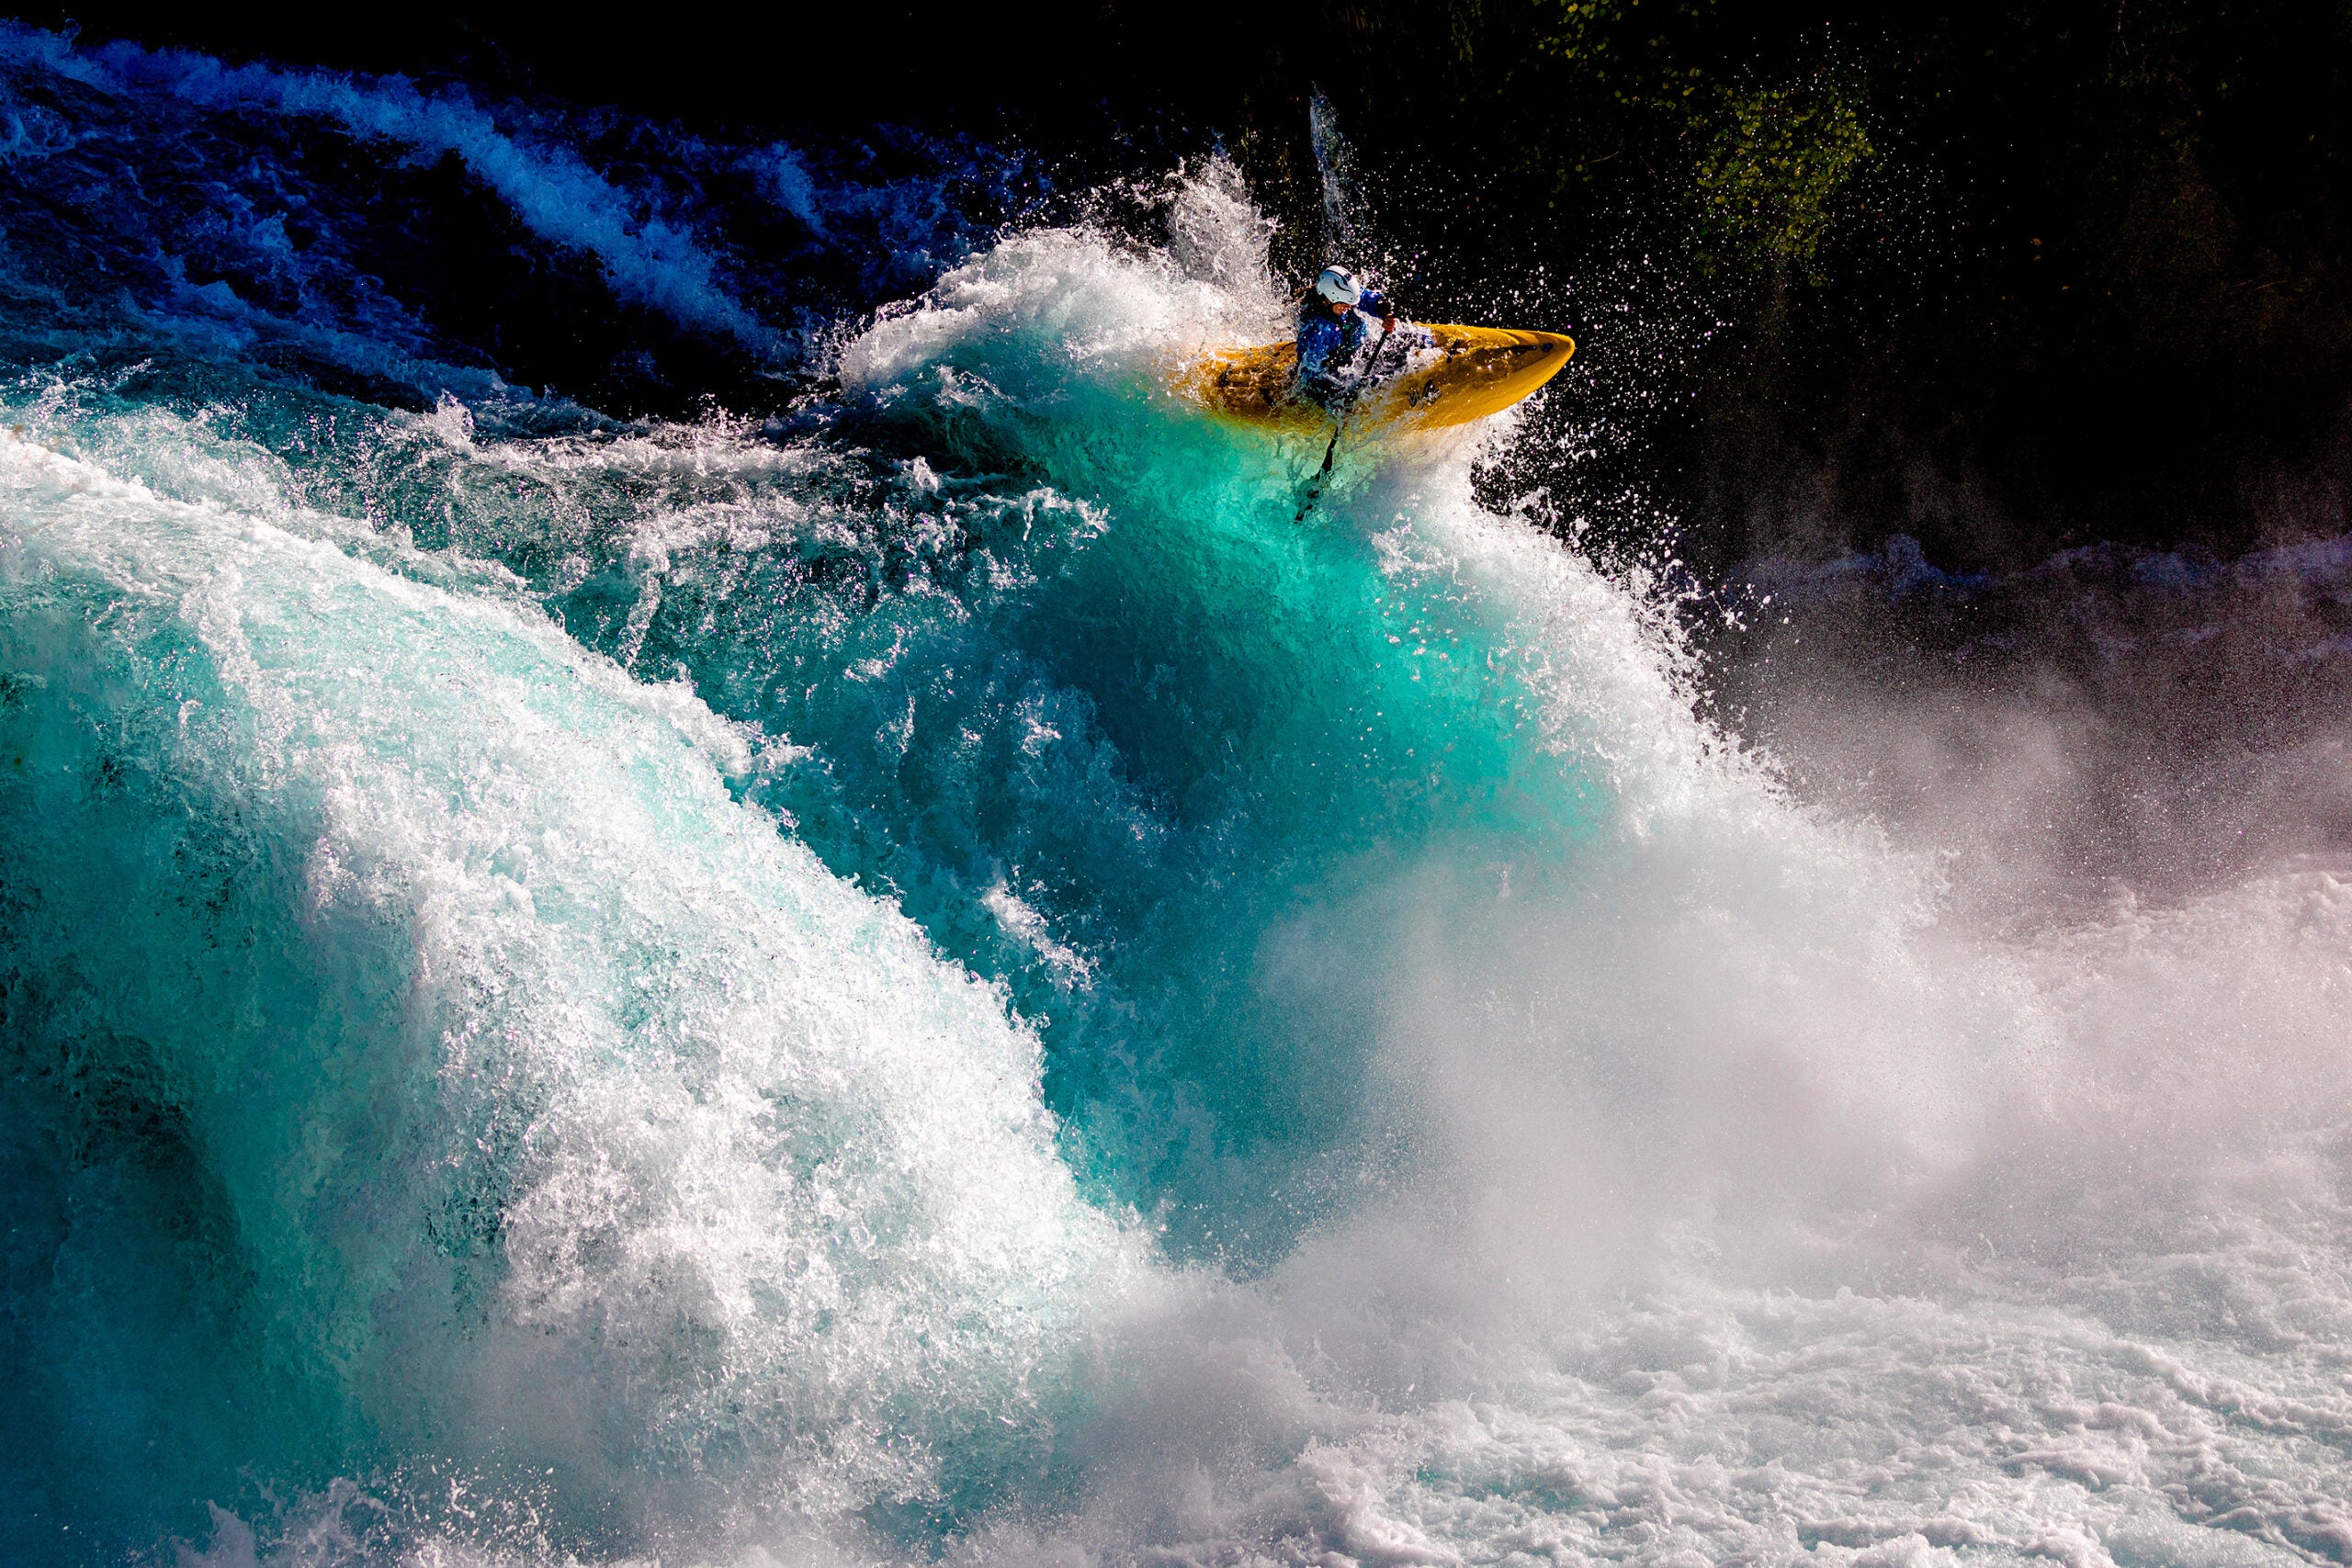 New Zealand photographer Rod Hill took home the award in the Energy category for his photo titled “Huka Falls,” which shows kayaker River Mutton dramatically emerging from a rapid in Huka Falls, New Zealand.